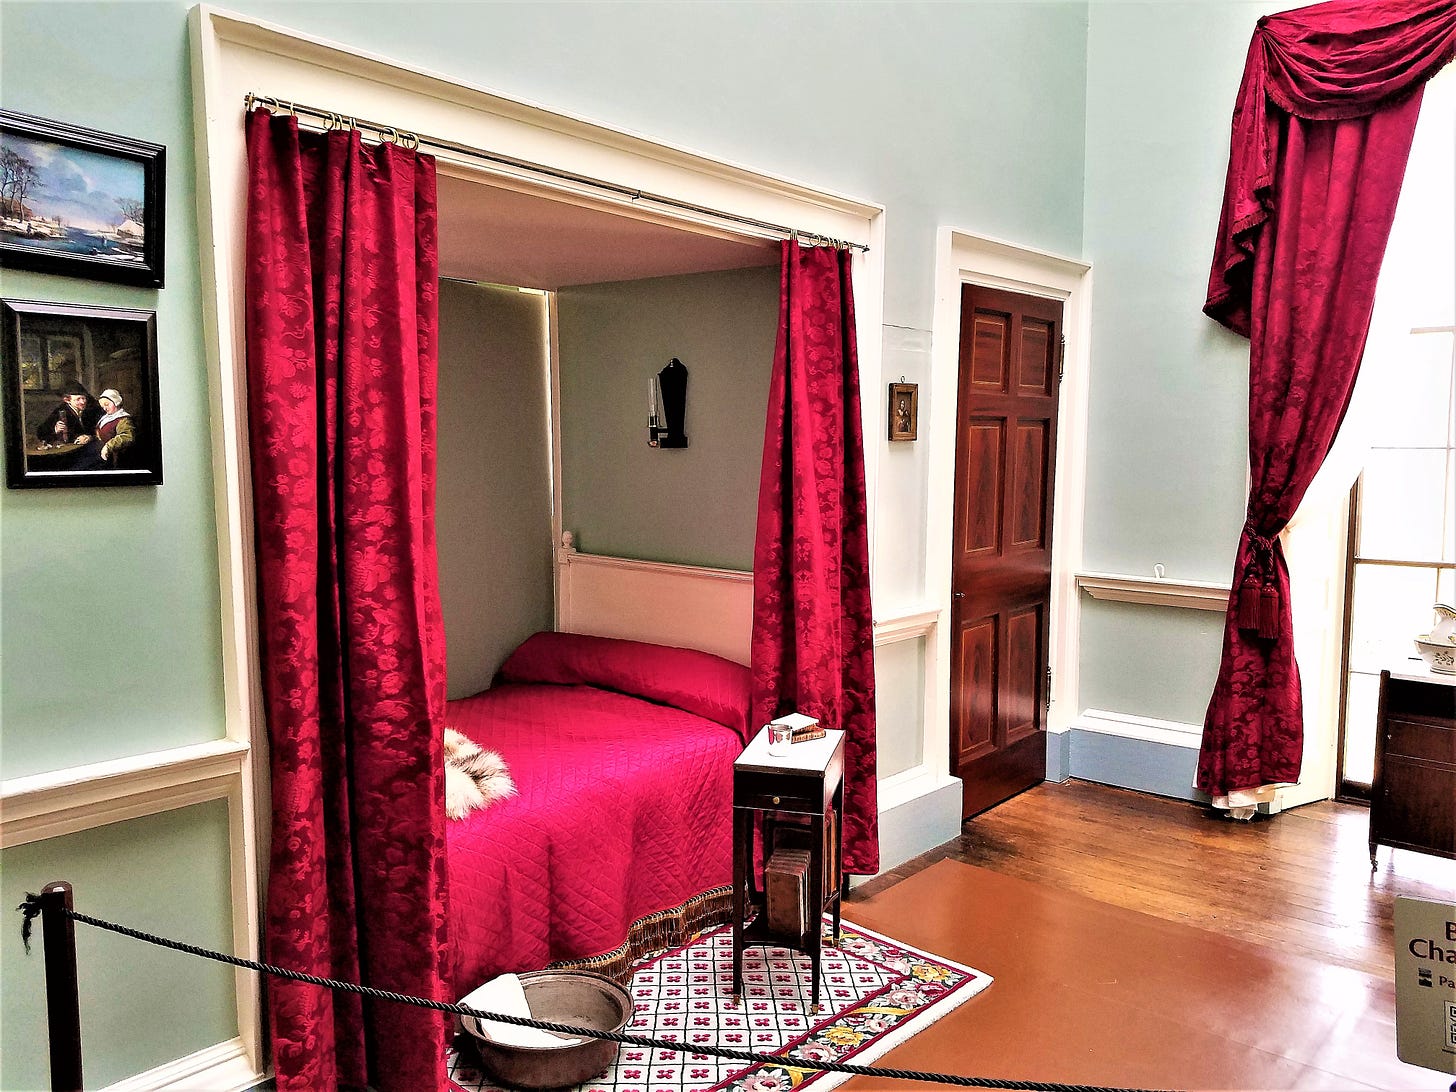 Red curtains hang beside a bed built into the wall for Thomas Jefferson.